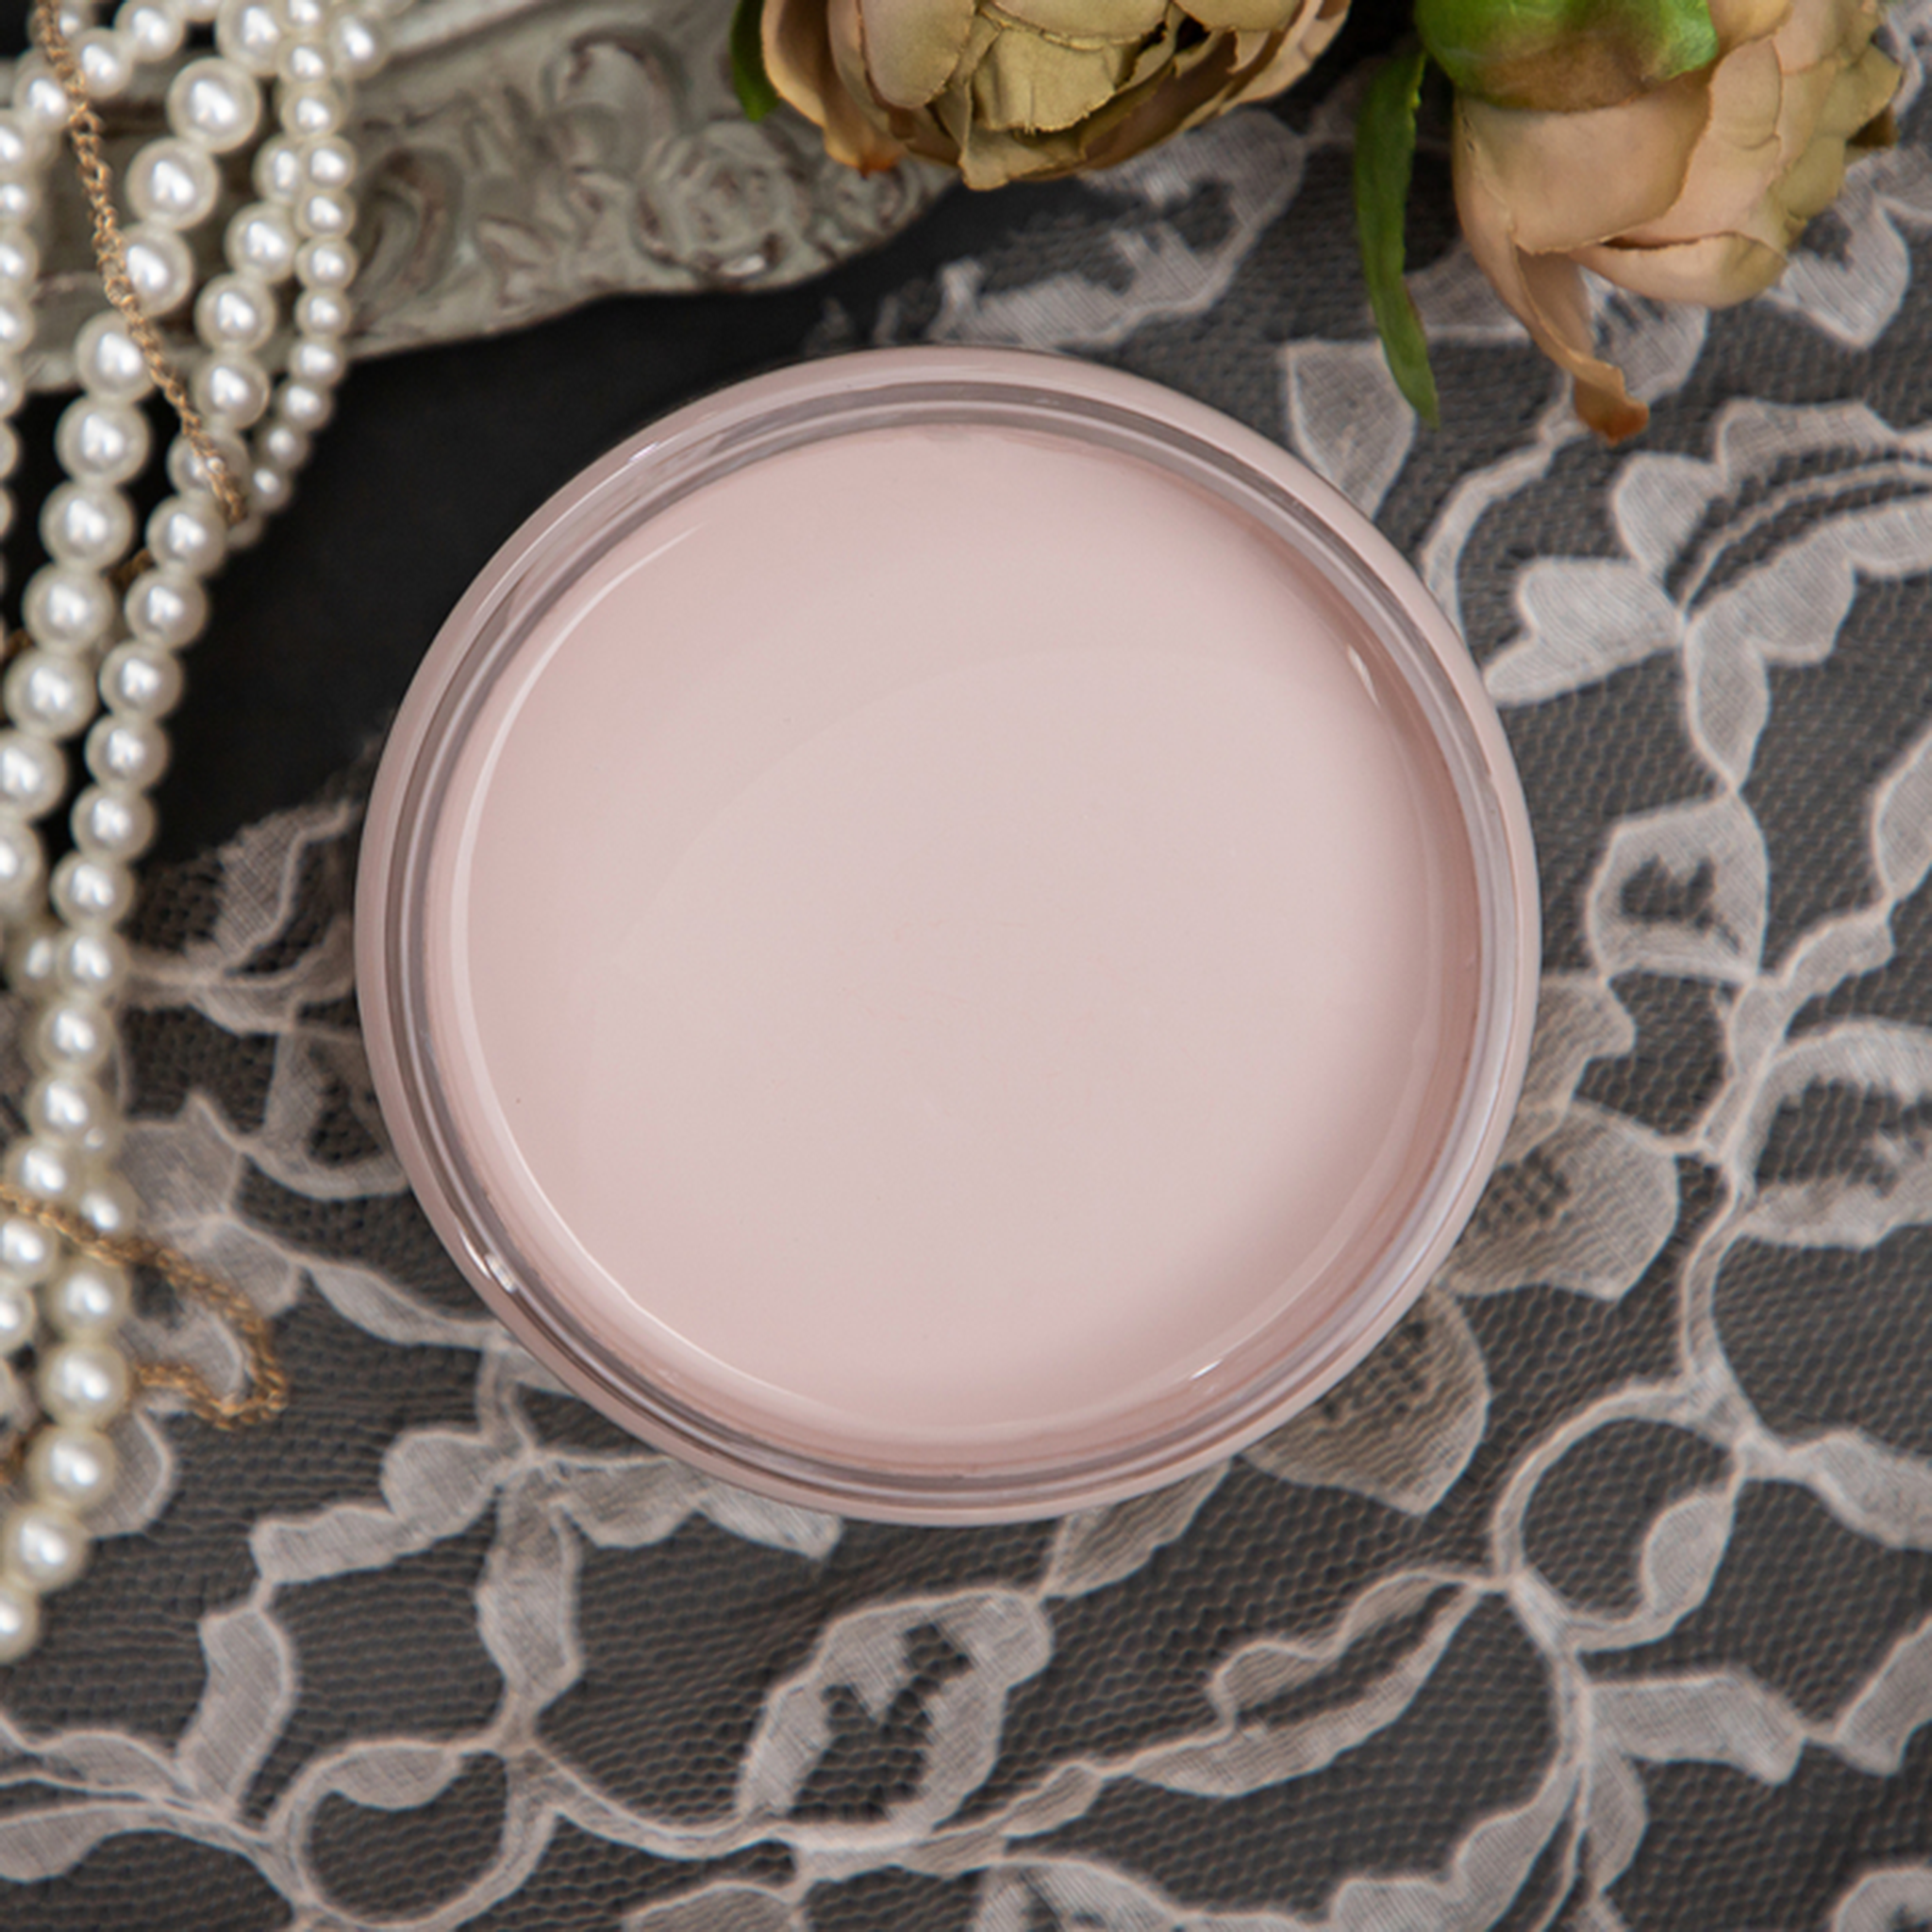 An arial view of an open container of Dixie Belle Paint Company’s Tea Rose Chalk Mineral Paint is sitting on lace and has pearl necklaces and roses around it.